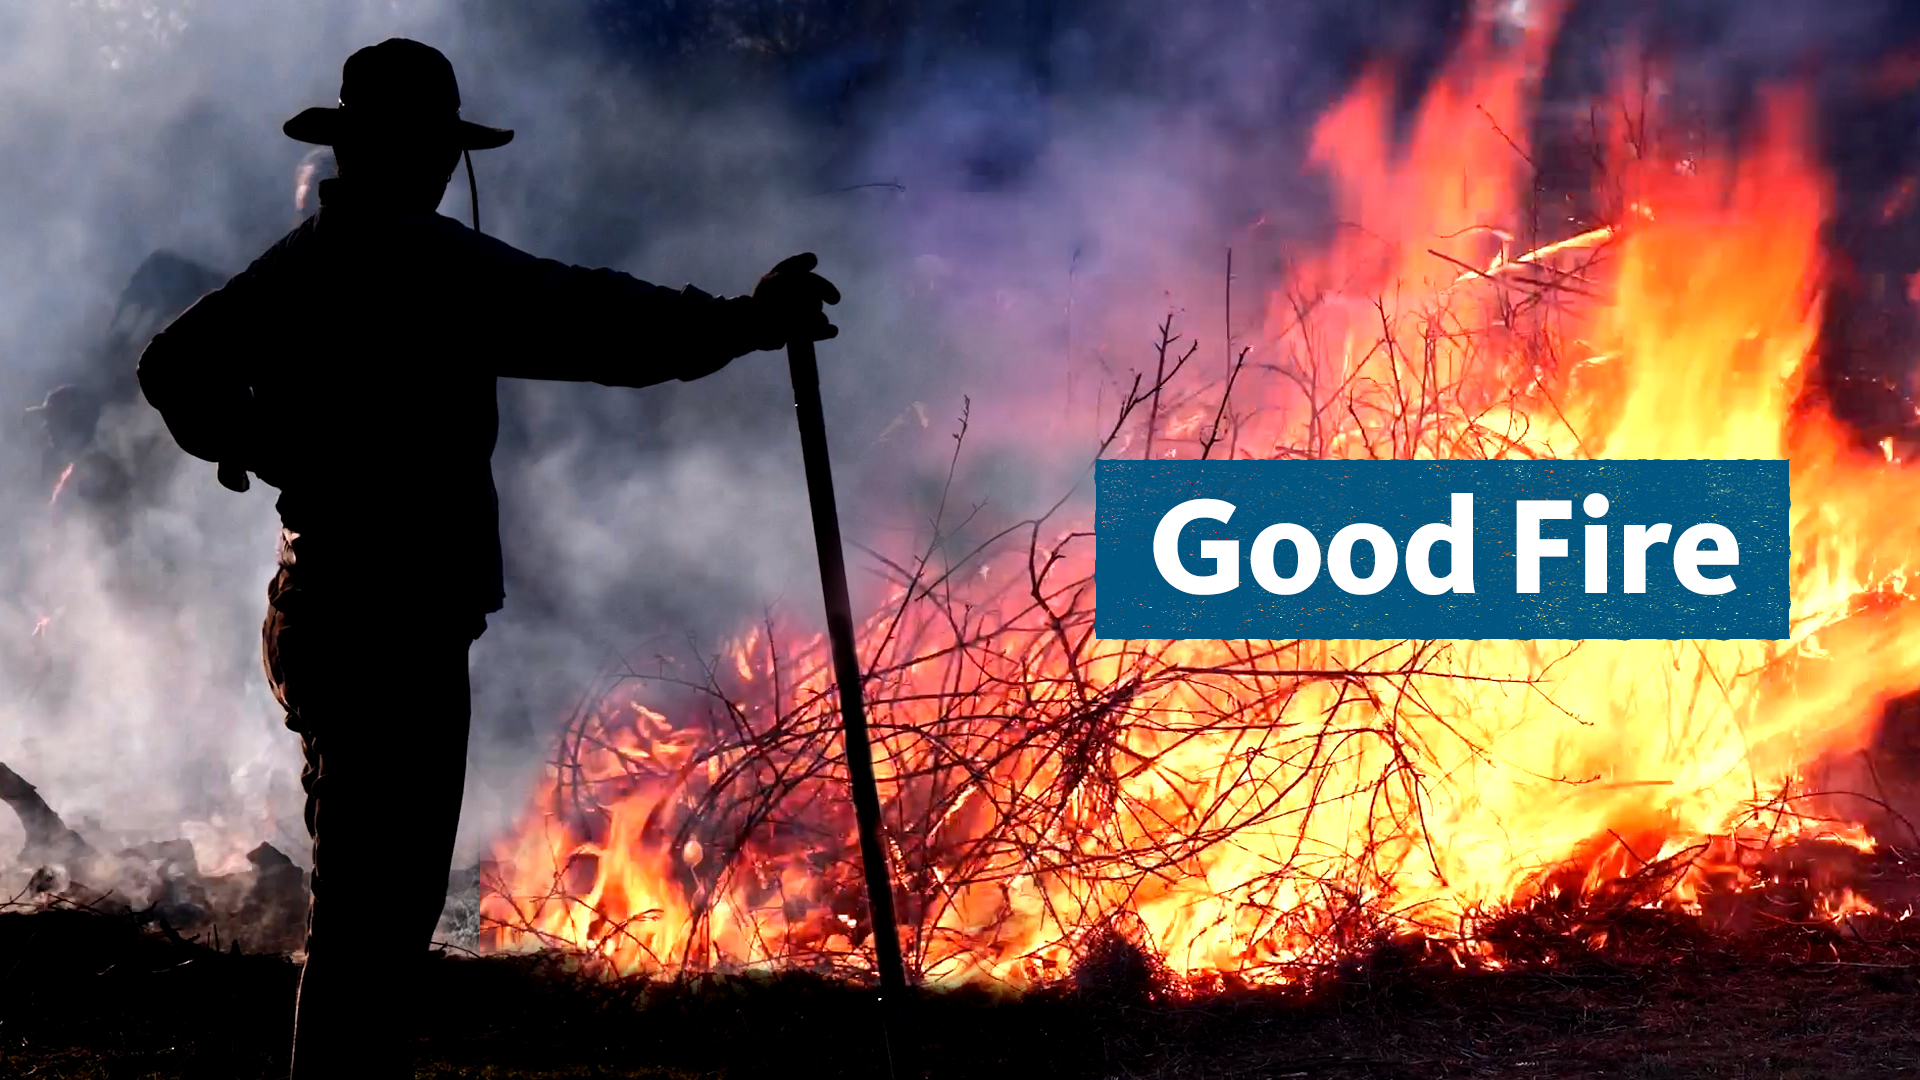 A person standing next to a cultural burn with the text 'Good Fire' over the fire